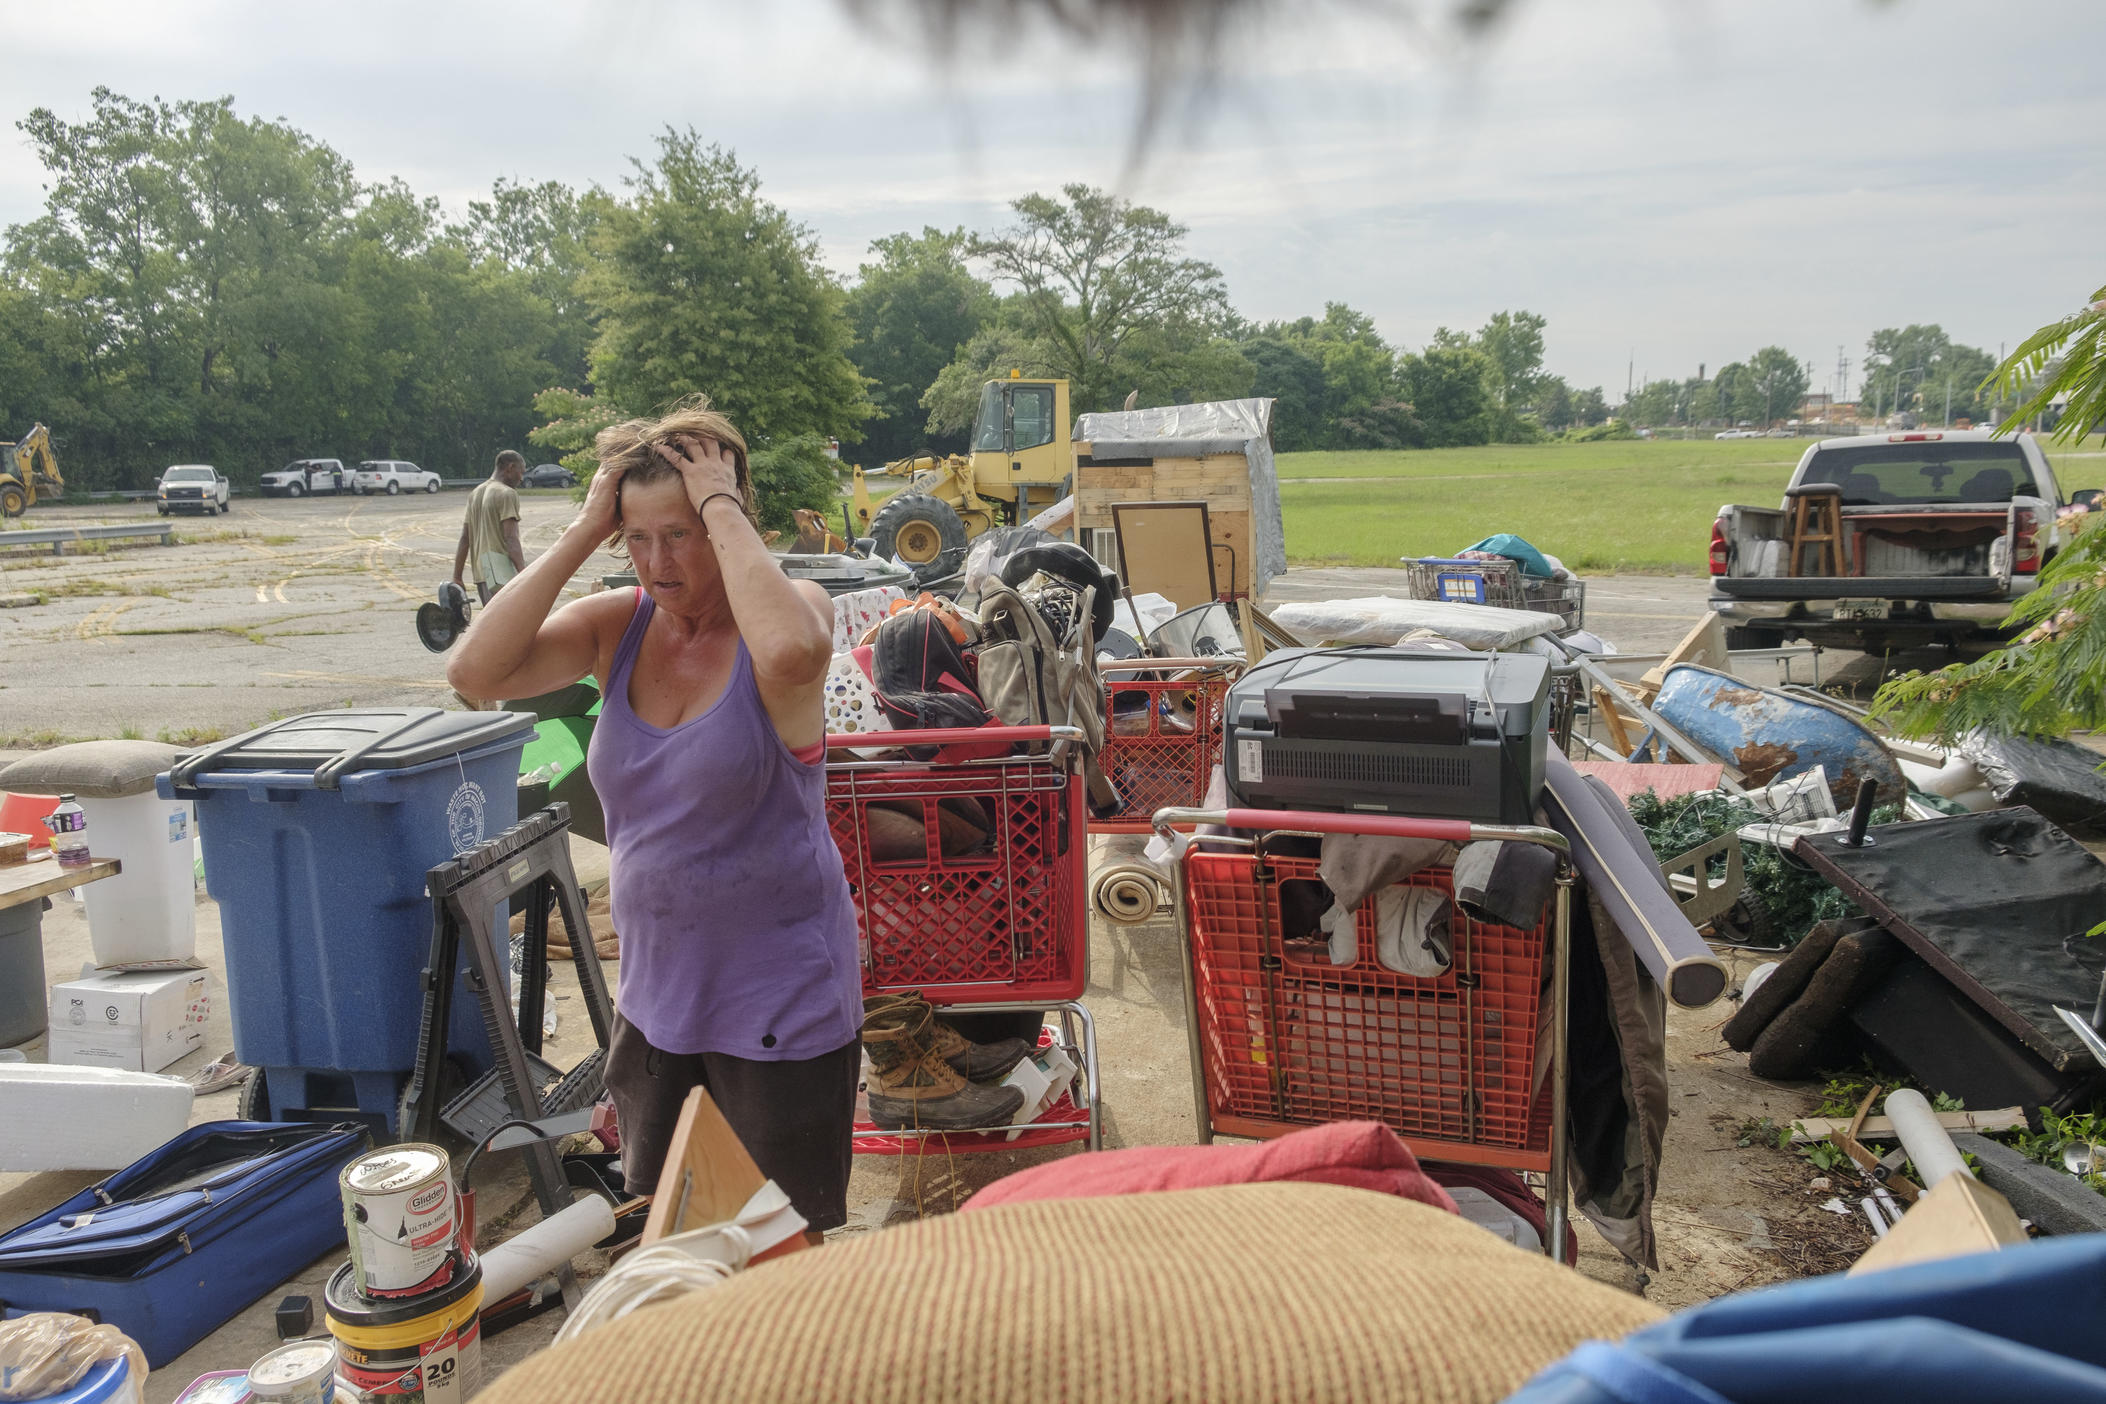 Pat Garrett pauses while packing up her belongings at the edge of a homeless encampment on Riverside Drive in Macon on June 8, 2022. Macon-Bibb County bulldozed one of the city's largest homeless encampments, saying it was necessary as a public health measure.